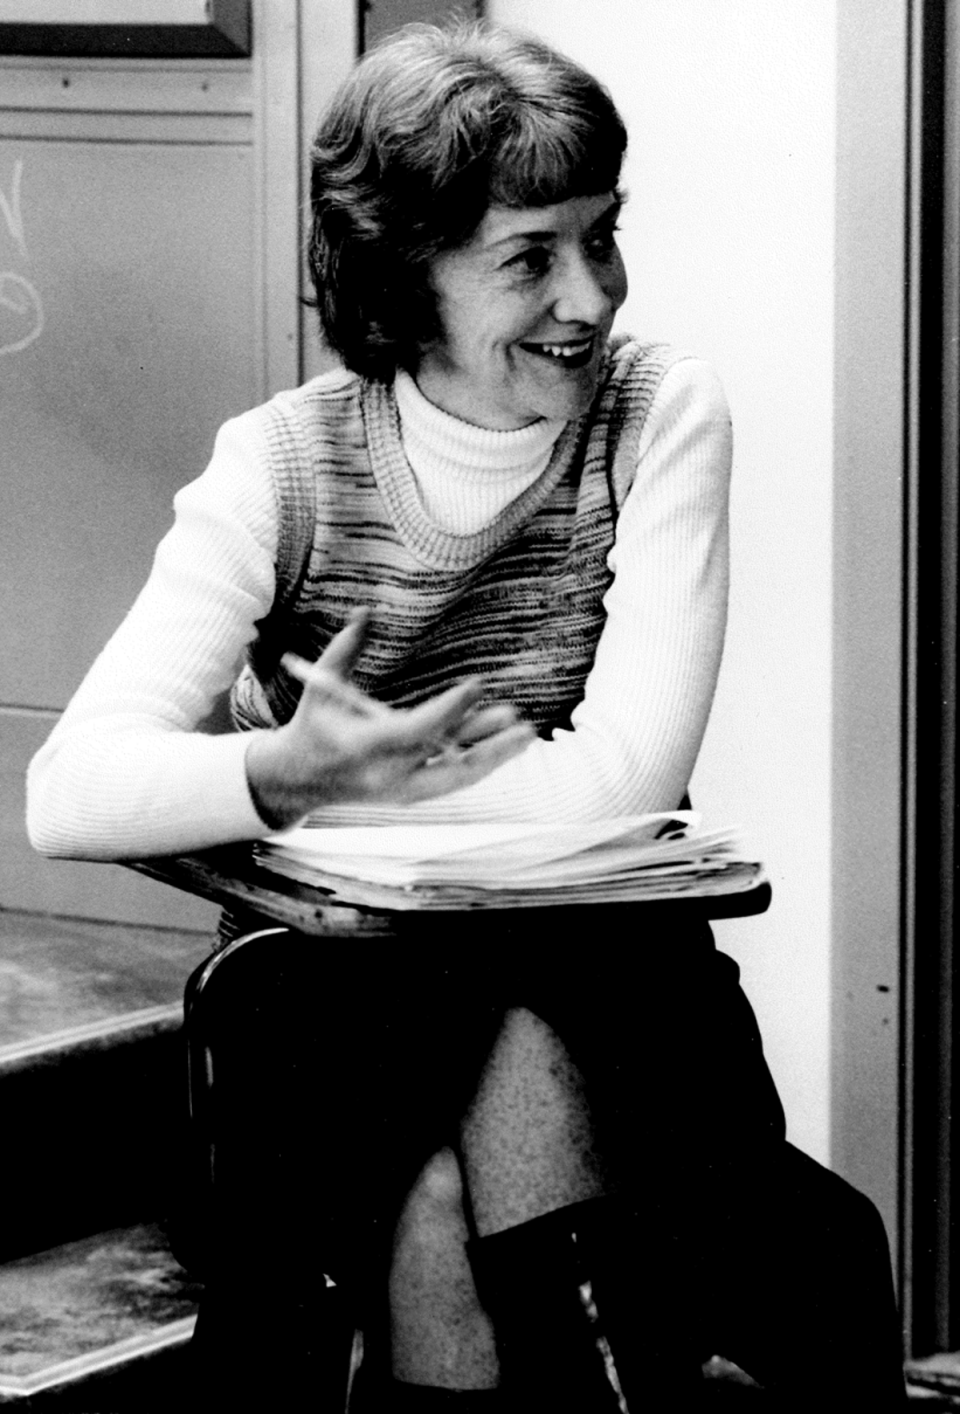 Burgess is pictured in a Boston College classroom in 1978, the same year she began consulting for the FBI (Boston College)